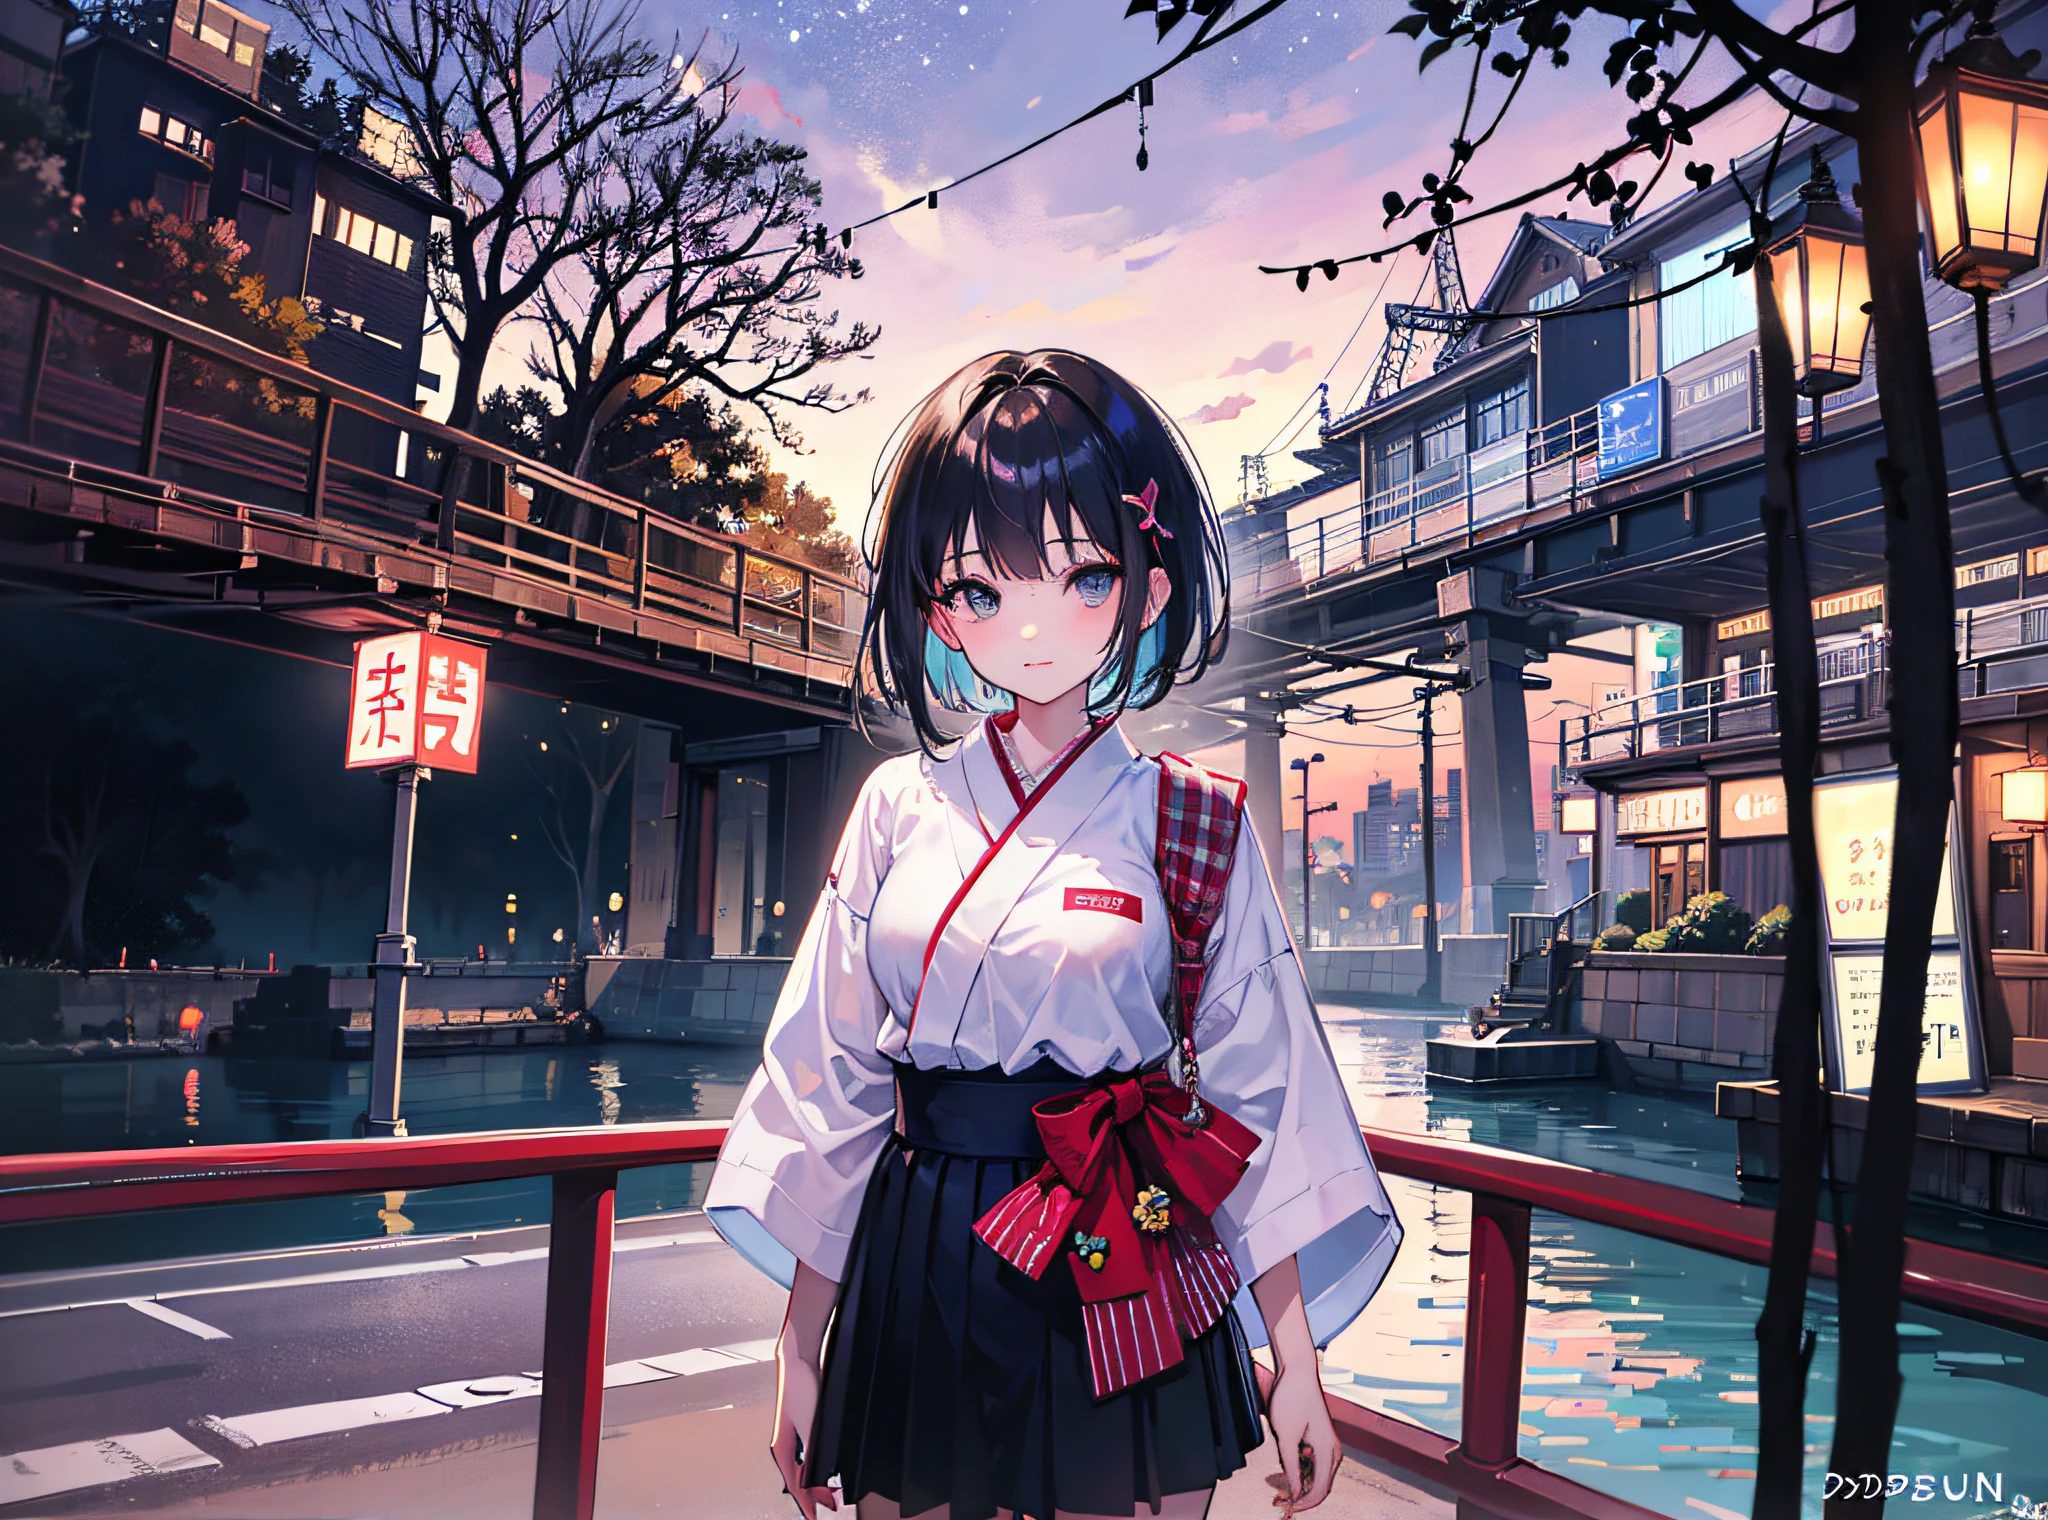 (Realistic painting style:1.0), Masterpiece, Best quality, absurderes, comic strip, illustration,
1 girl, medium hair, cute girl, young and cute girl, japanese girl, {Breasts}, 
a girl standing on a bridge with lights in the background, with short hair, in tokyo, in tokyo at night, in carnival, carnival,